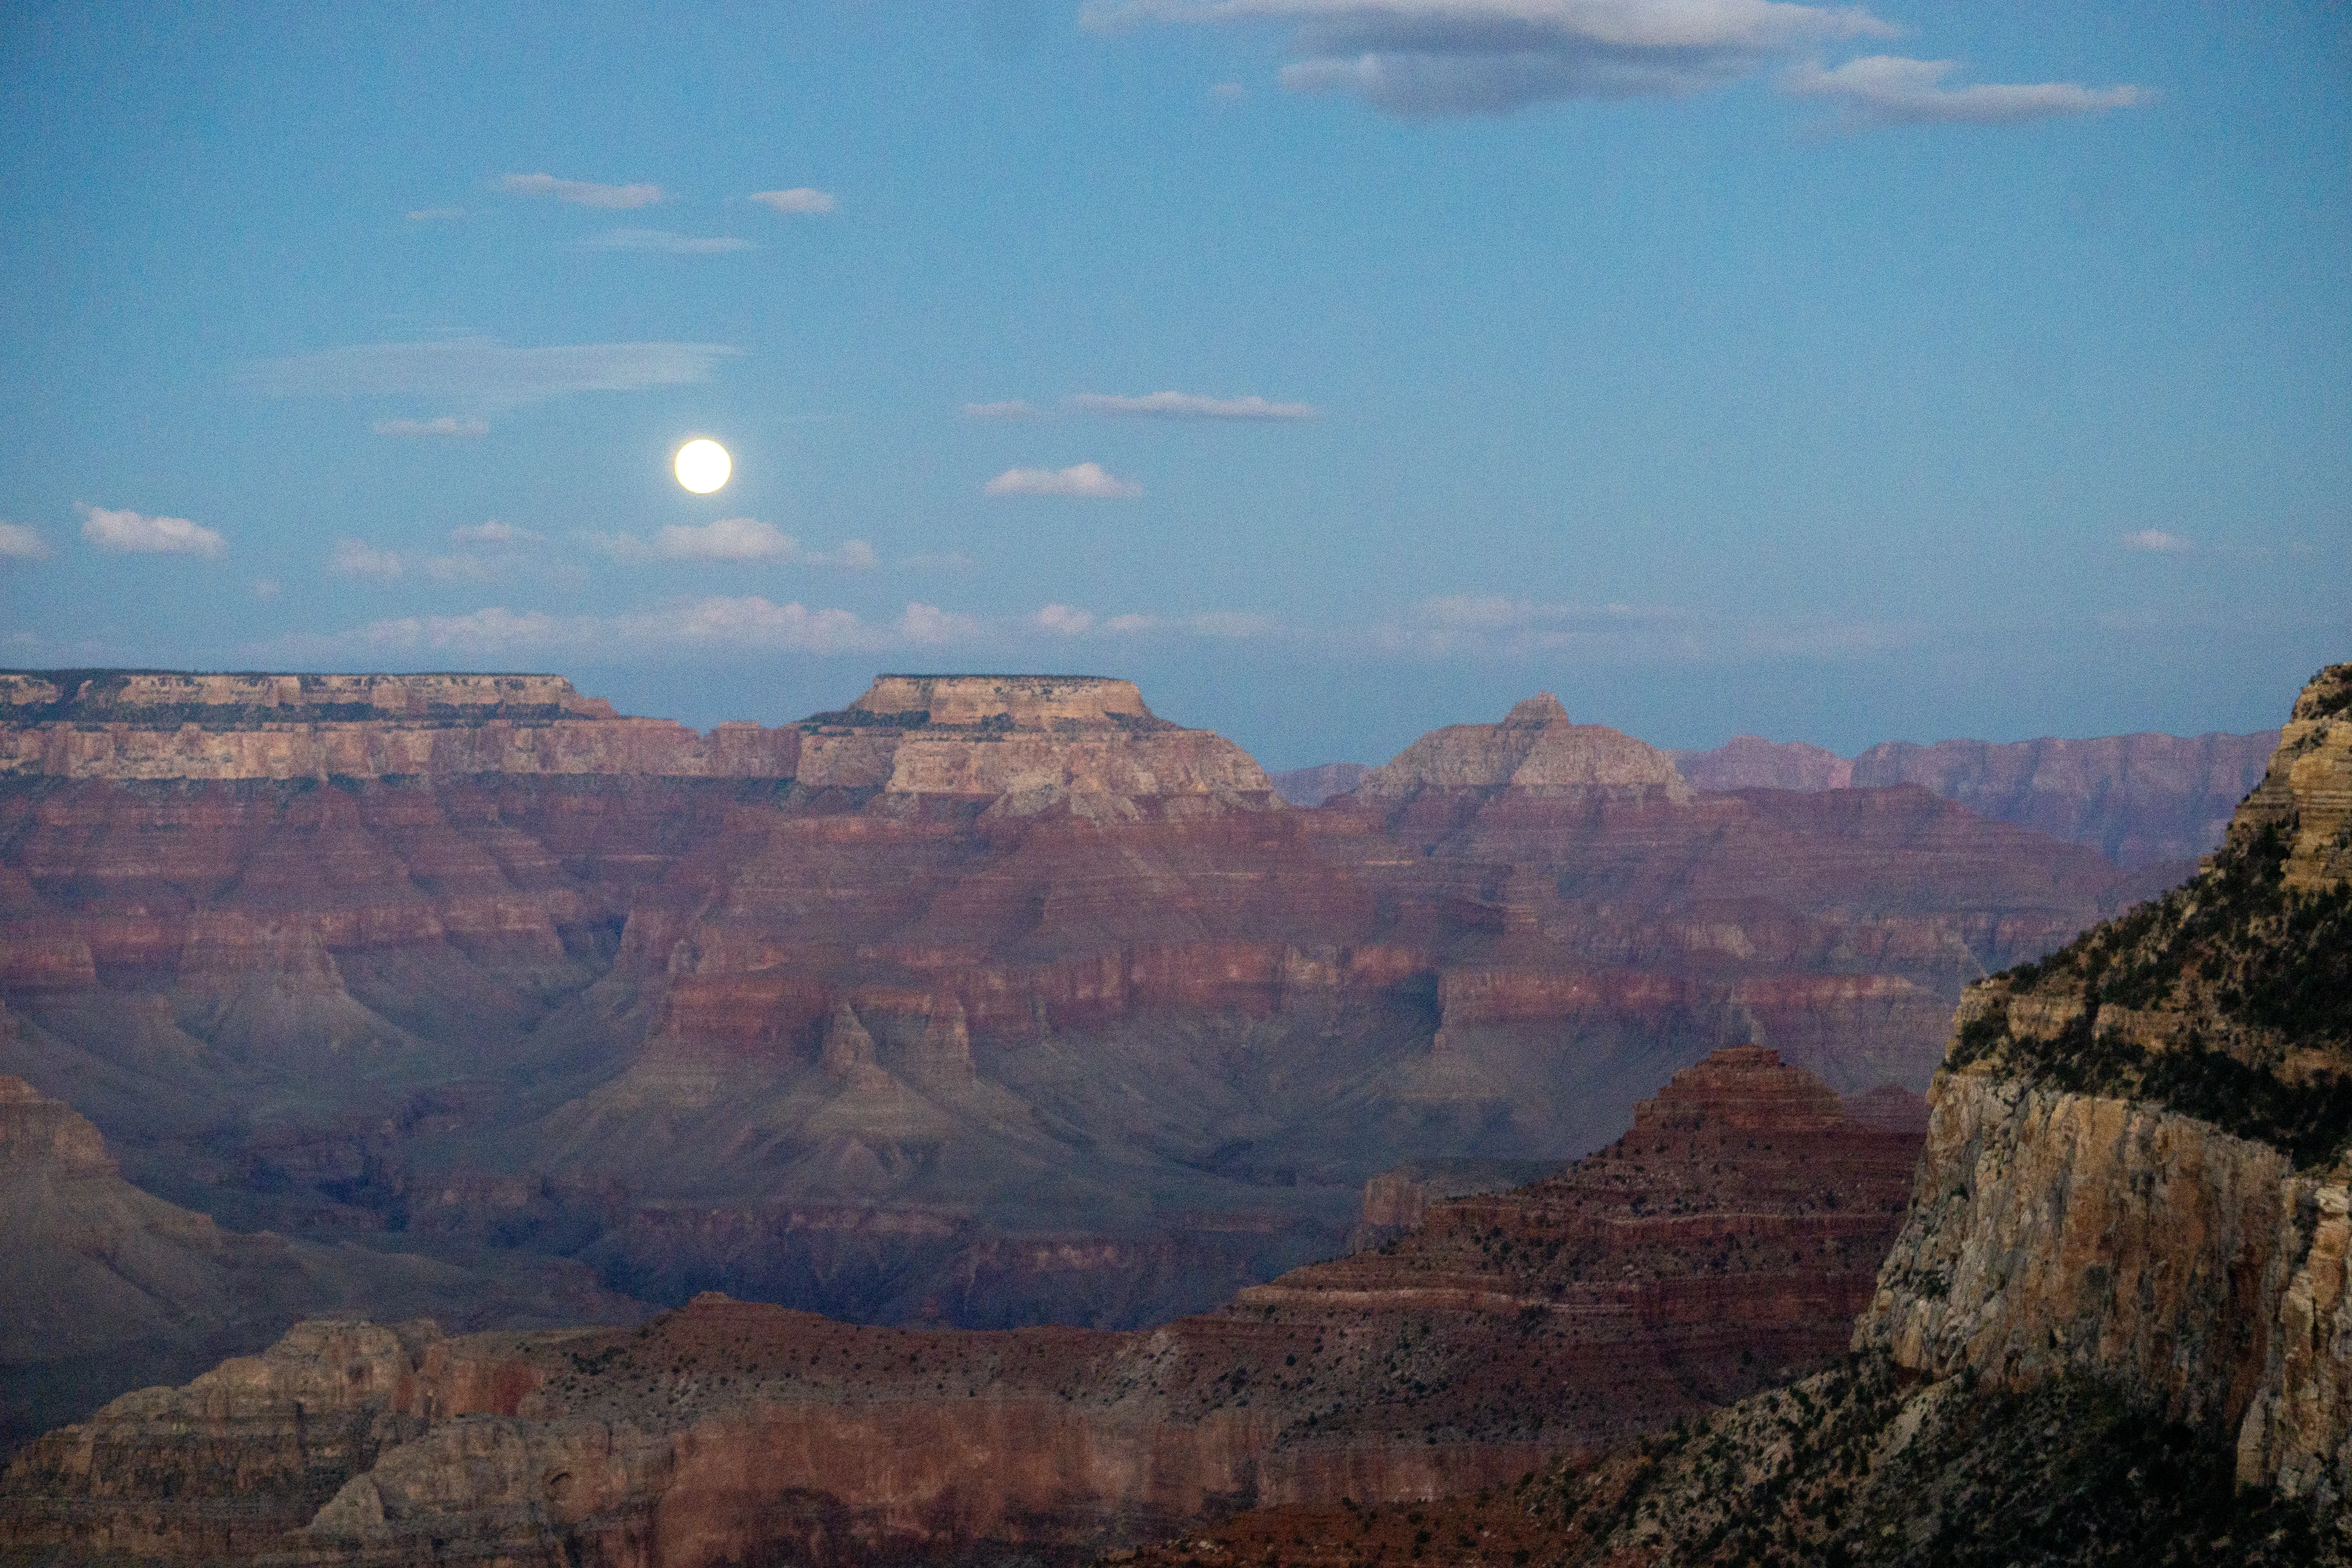 alt: A full moon rises over the Grand Canyon. The Canyon walls look pink.